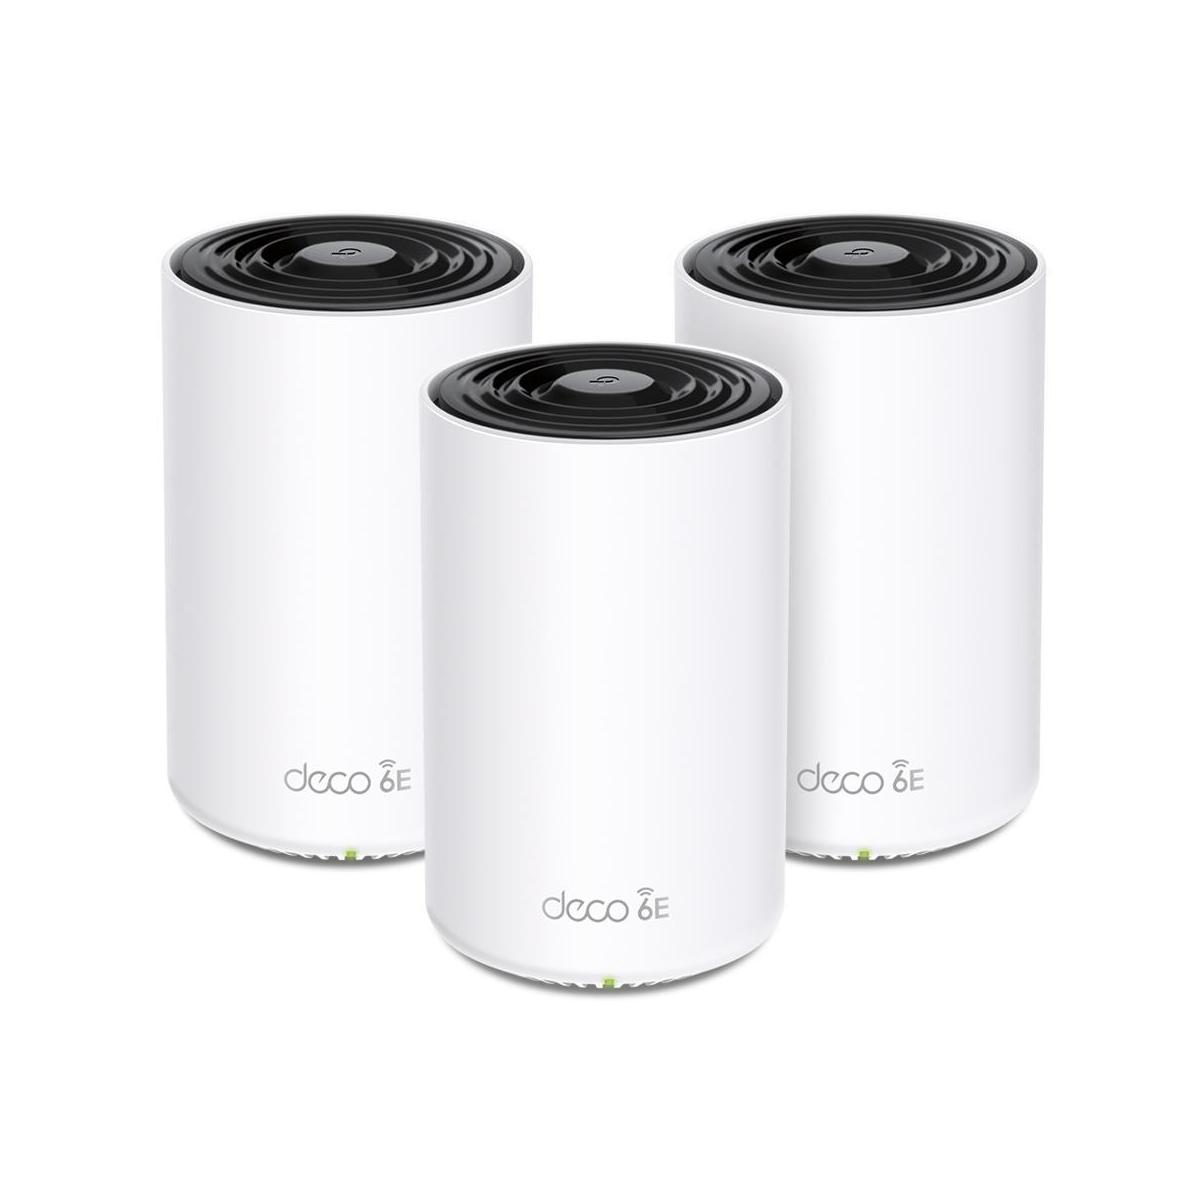 Point TP-LINK XE75(3-PACK) Access DECO